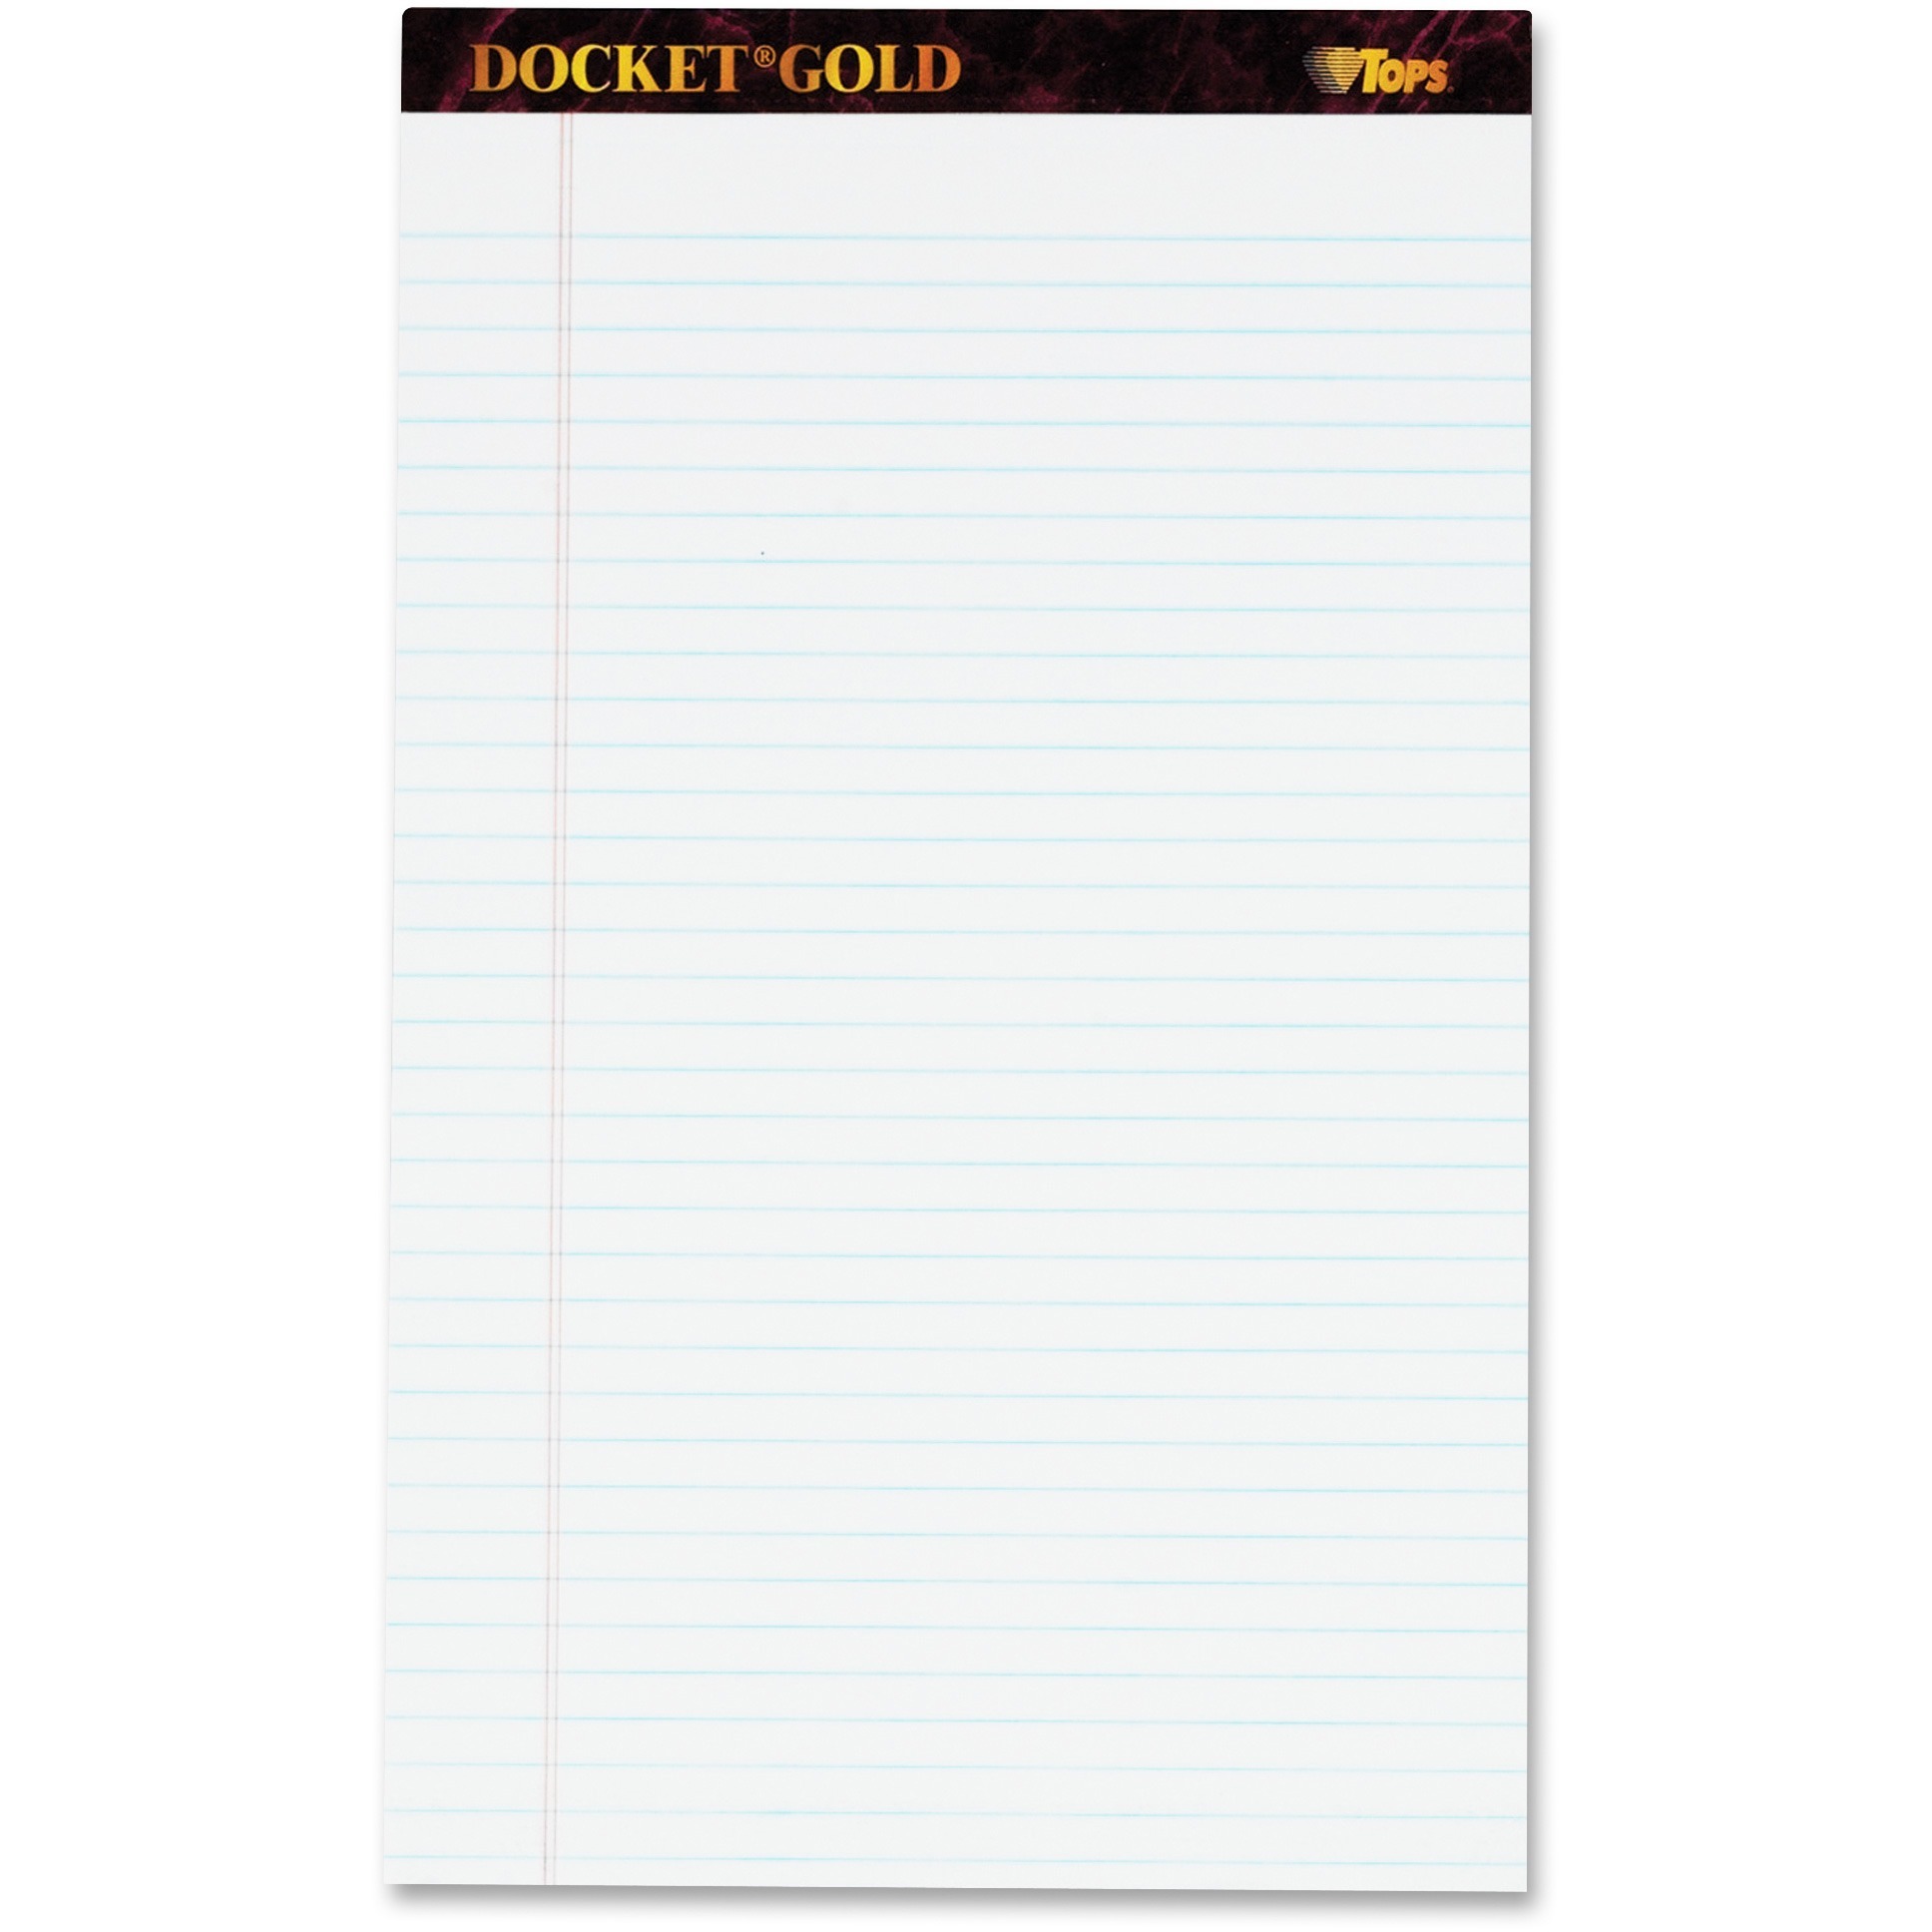 TOPS Docket Gold Legal Ruled White Legal Pads - Legal - 50 Sheets - Double Stitched - 0.34" Ruled - 20 lb Basis Weight - Legal -